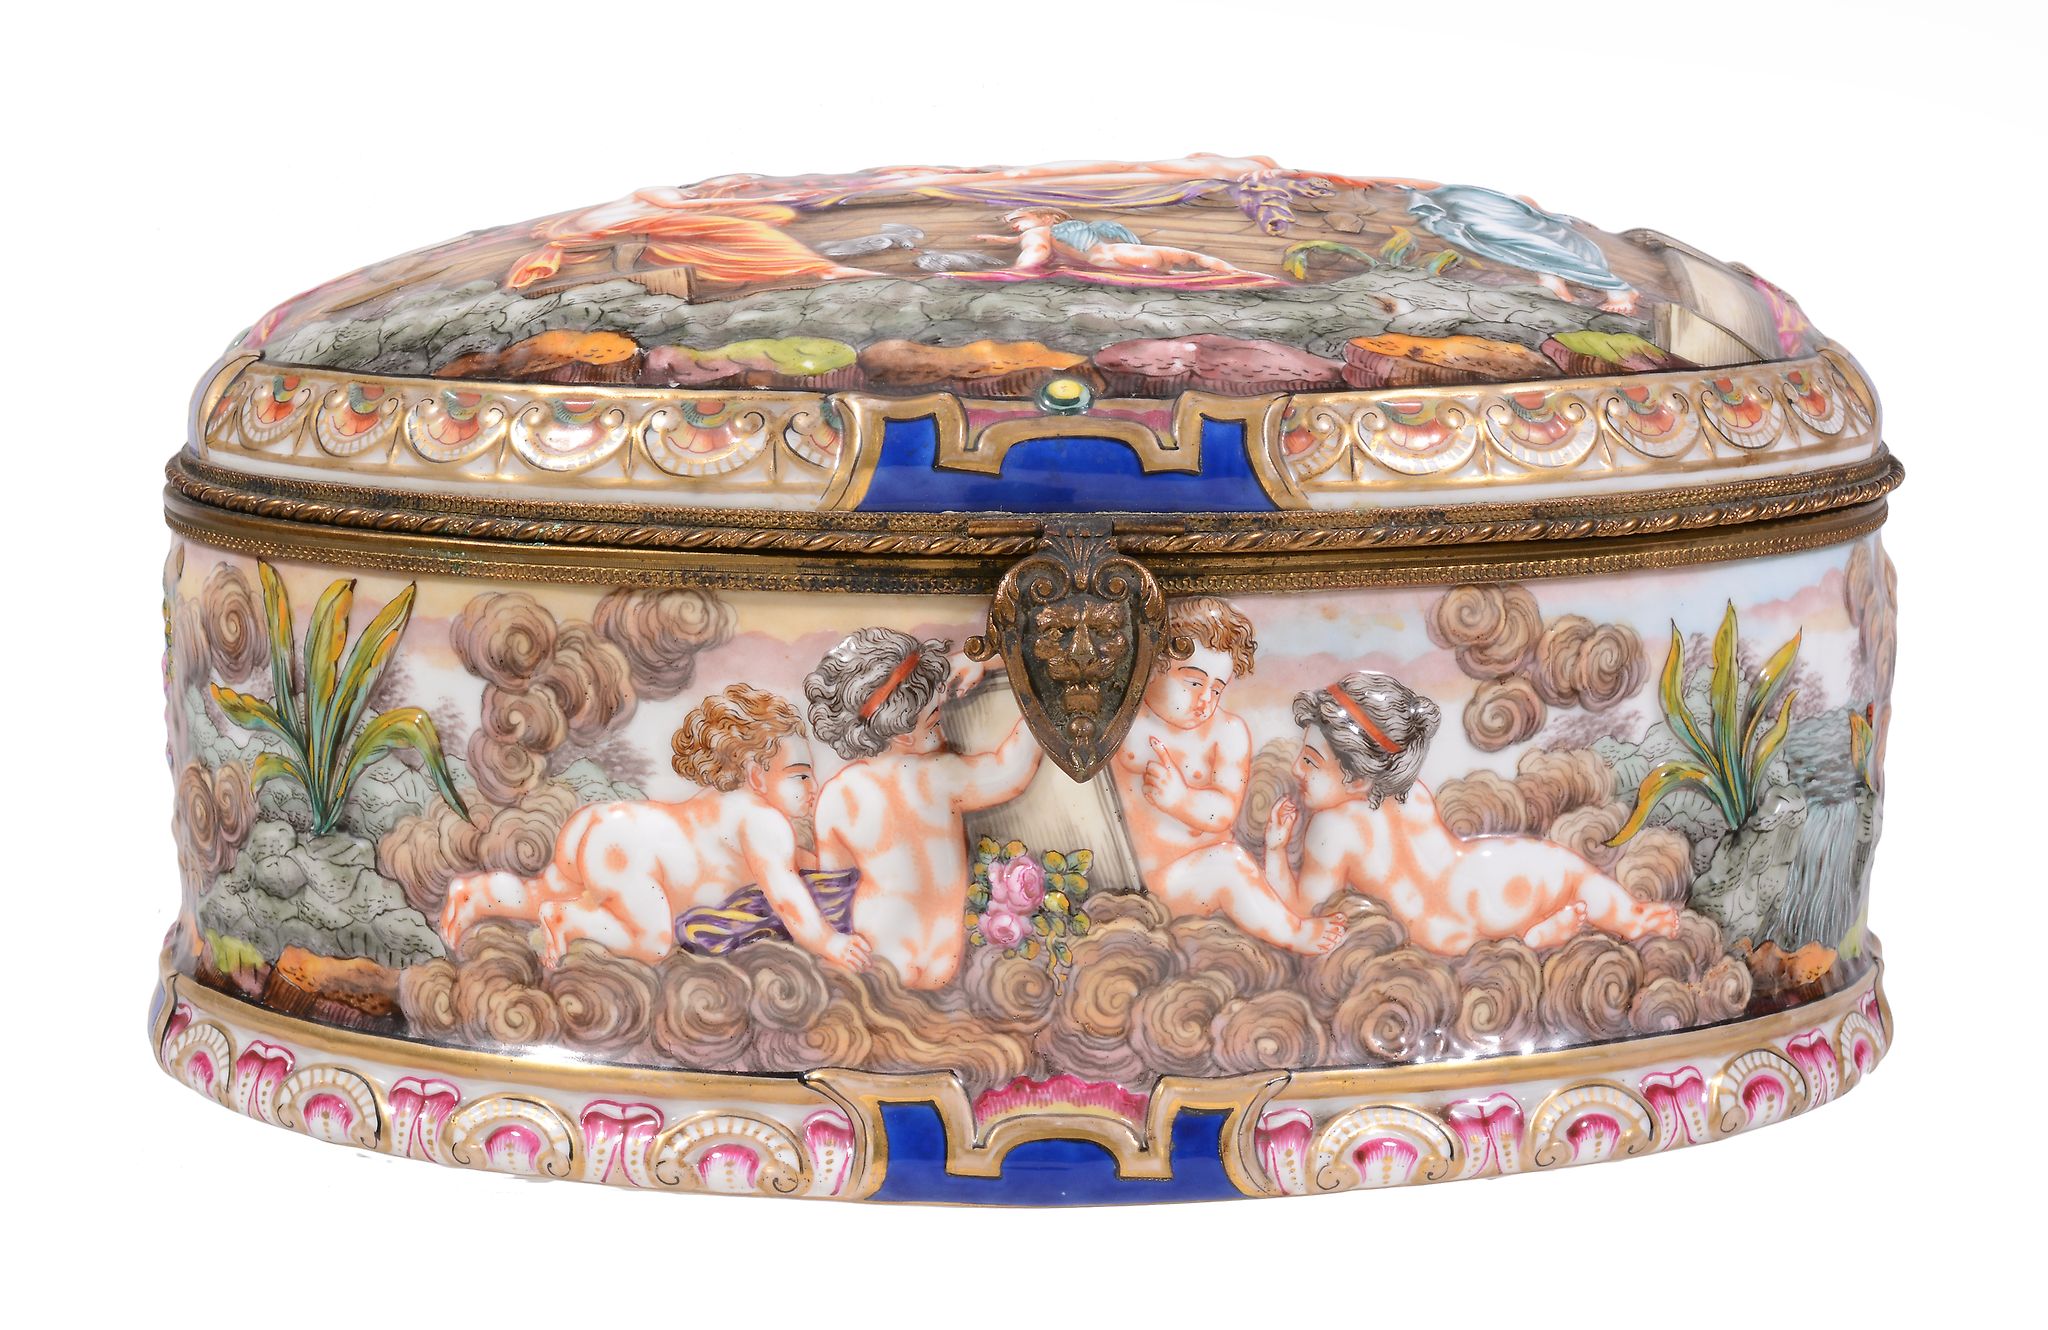 A Naples-stlye oval casket and hinged cover, circa 1900  A Naples-stlye oval casket and hinged